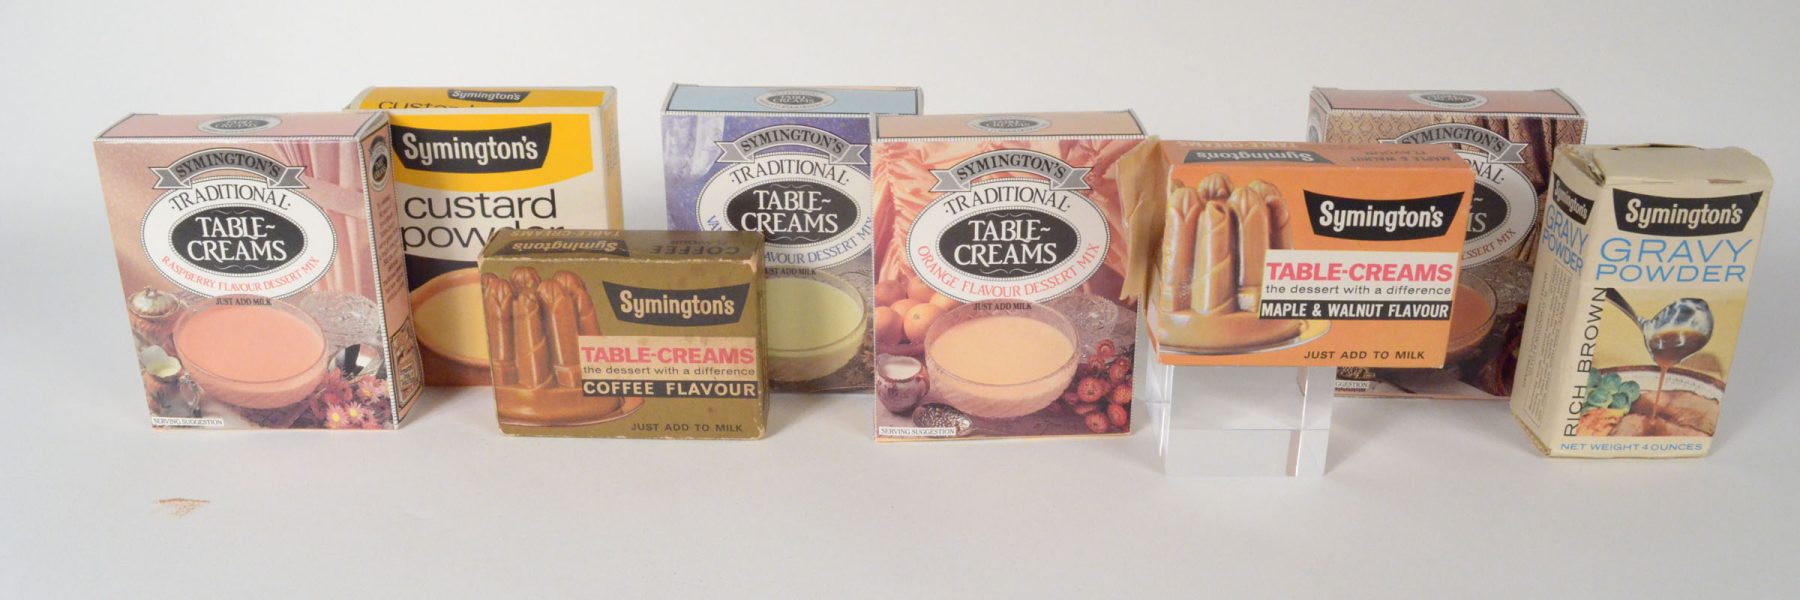 Object Symington Foods Table Cream Packaging Group Aspect Ratio 1800 600